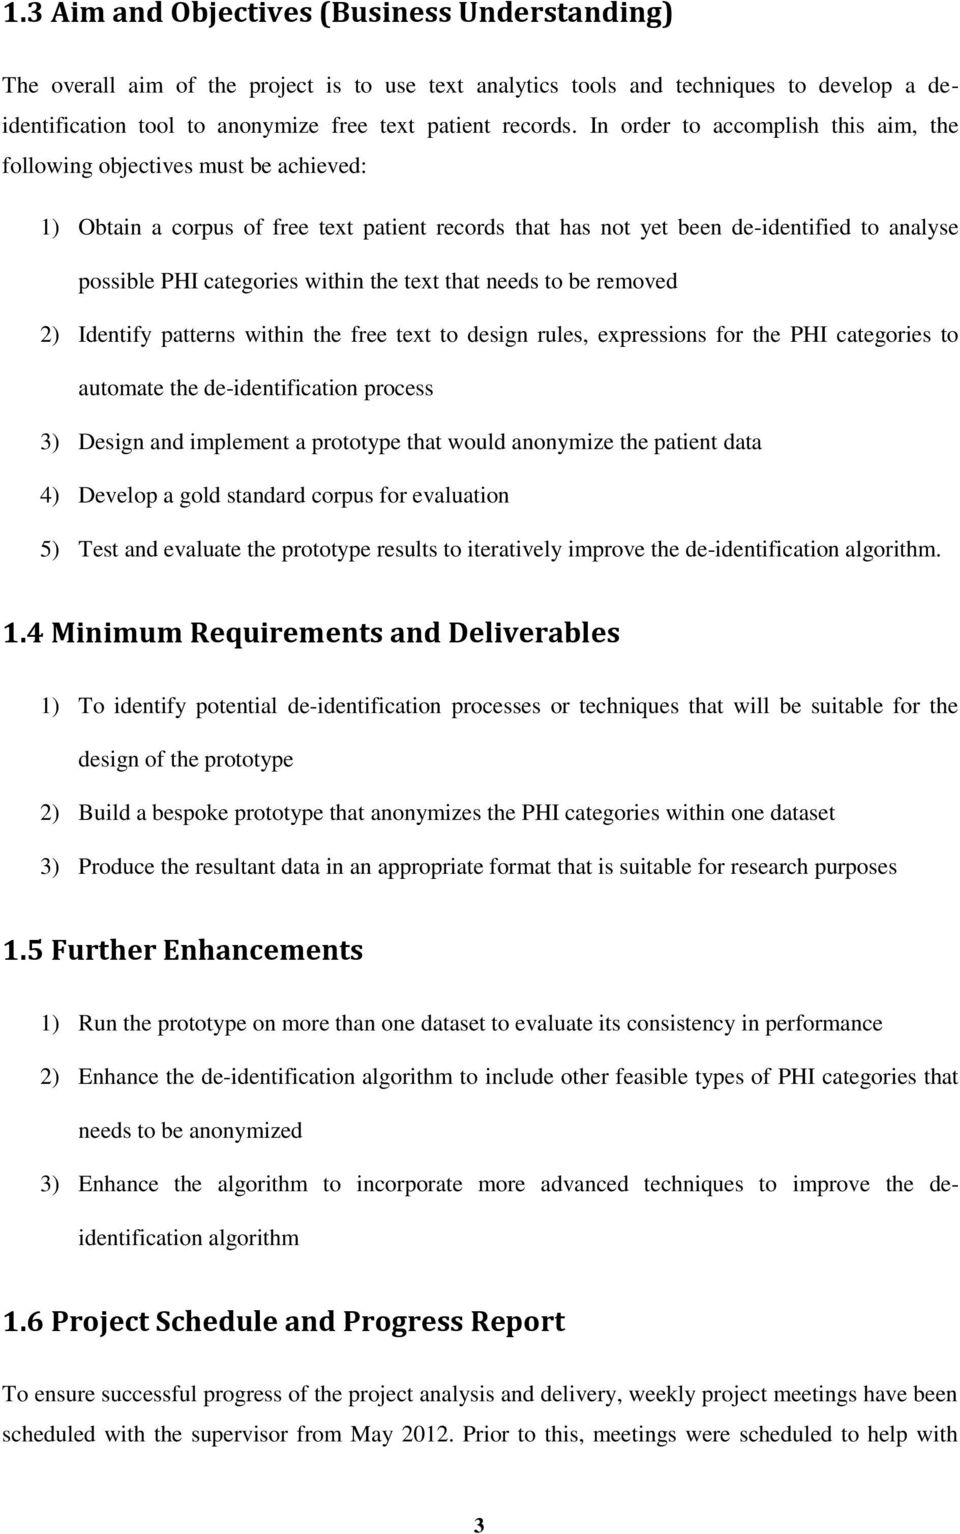 within the text that needs to be removed 2) Identify patterns within the free text to design rules, expressions for the PHI categories to automate the de-identification process 3) Design and